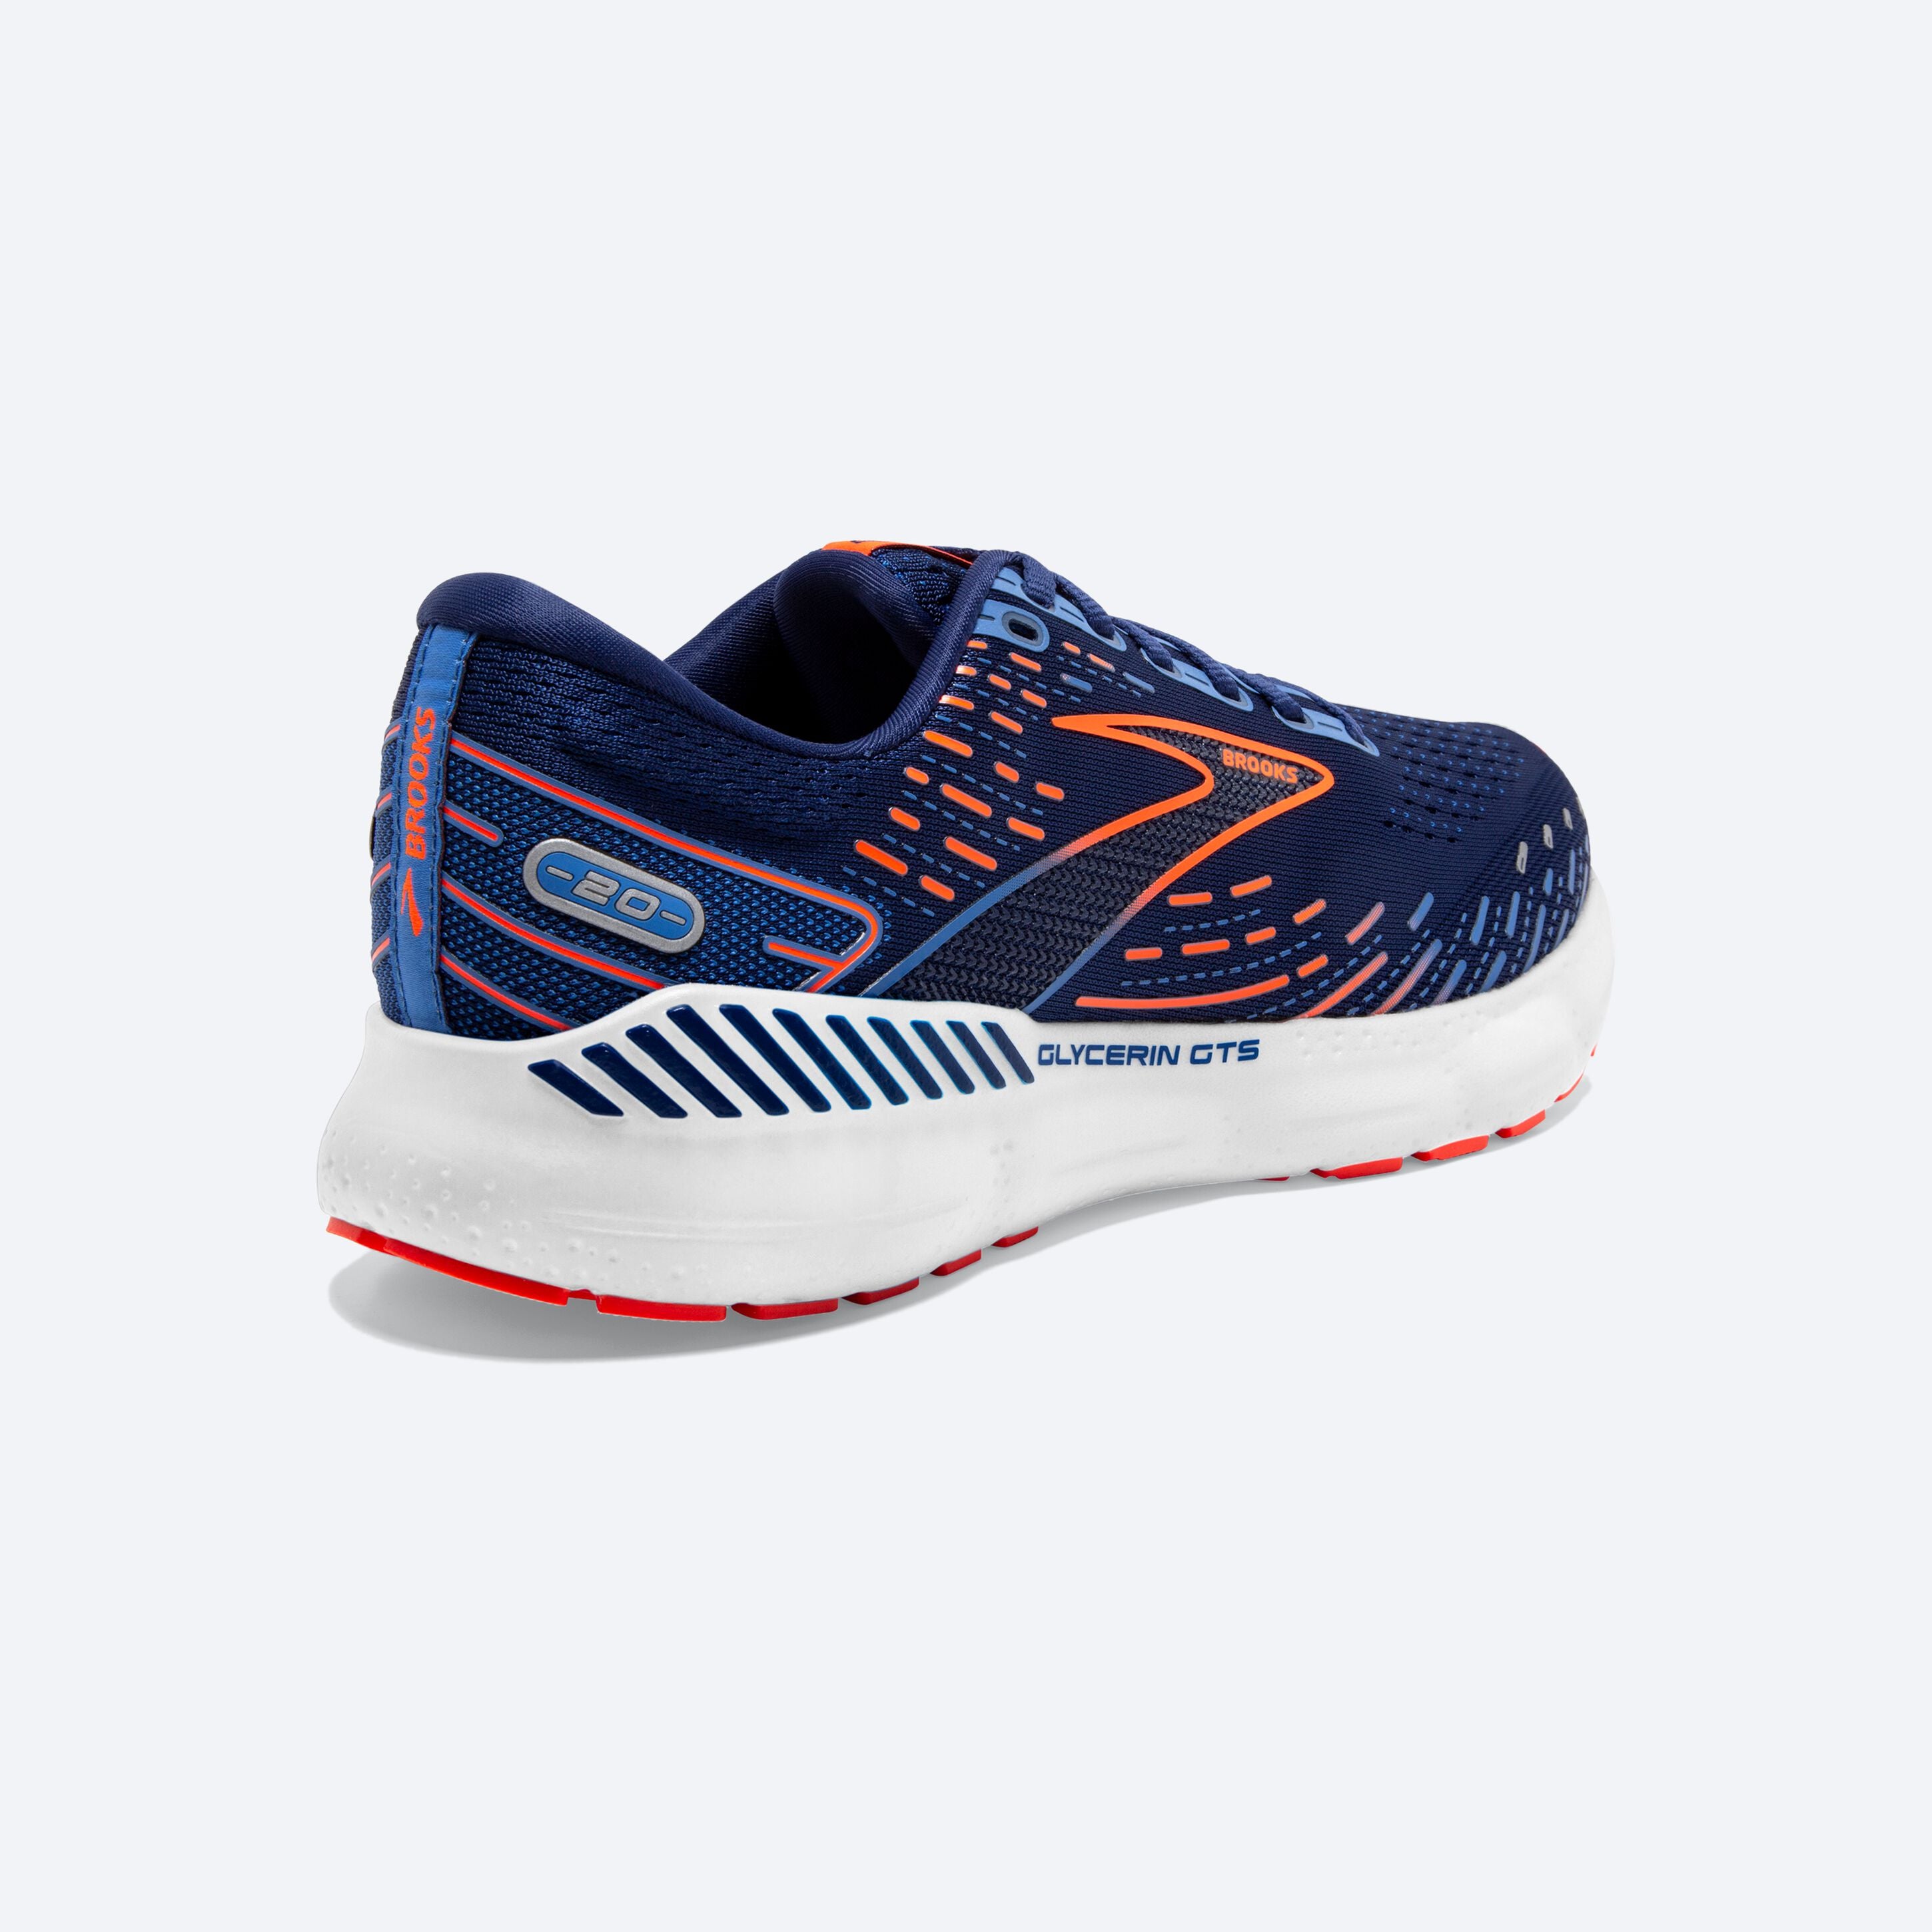 Back angle view of the Men's Glycerin GTS 20 in the wide 2E width, color Blue depths/Palace blue/Orange